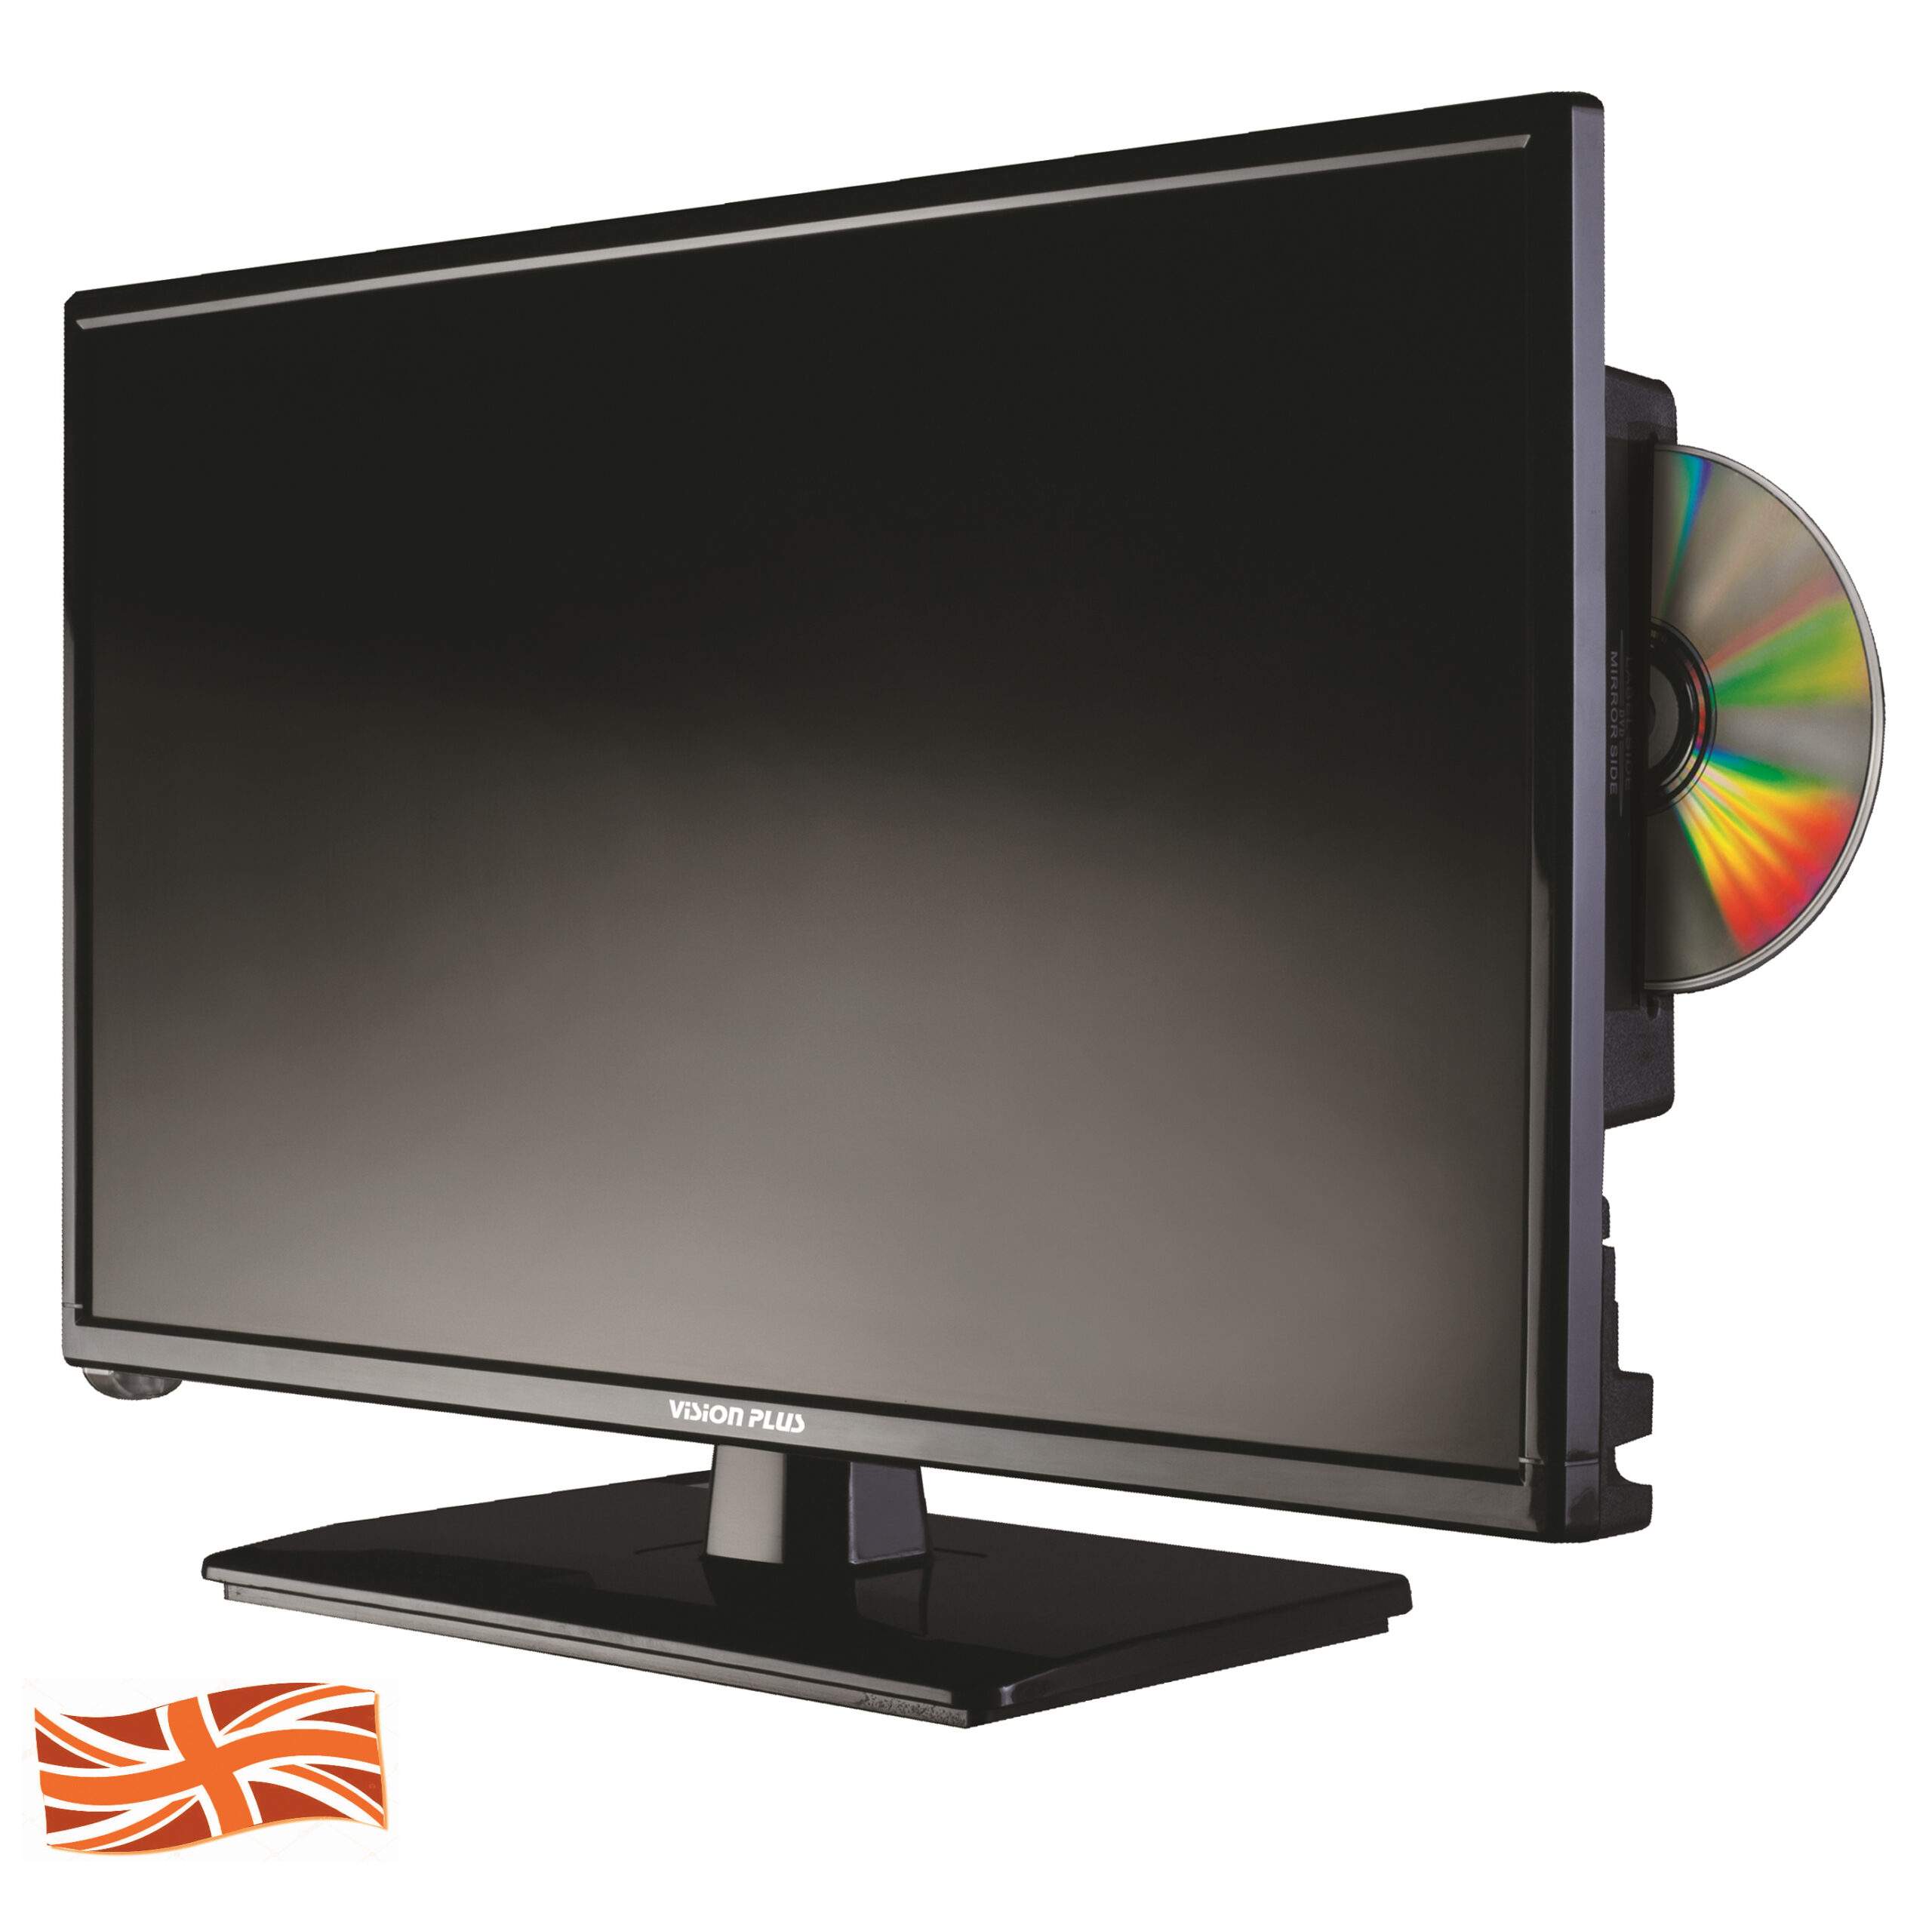 Vision Plus 21.5" TV With Built in DVD Player